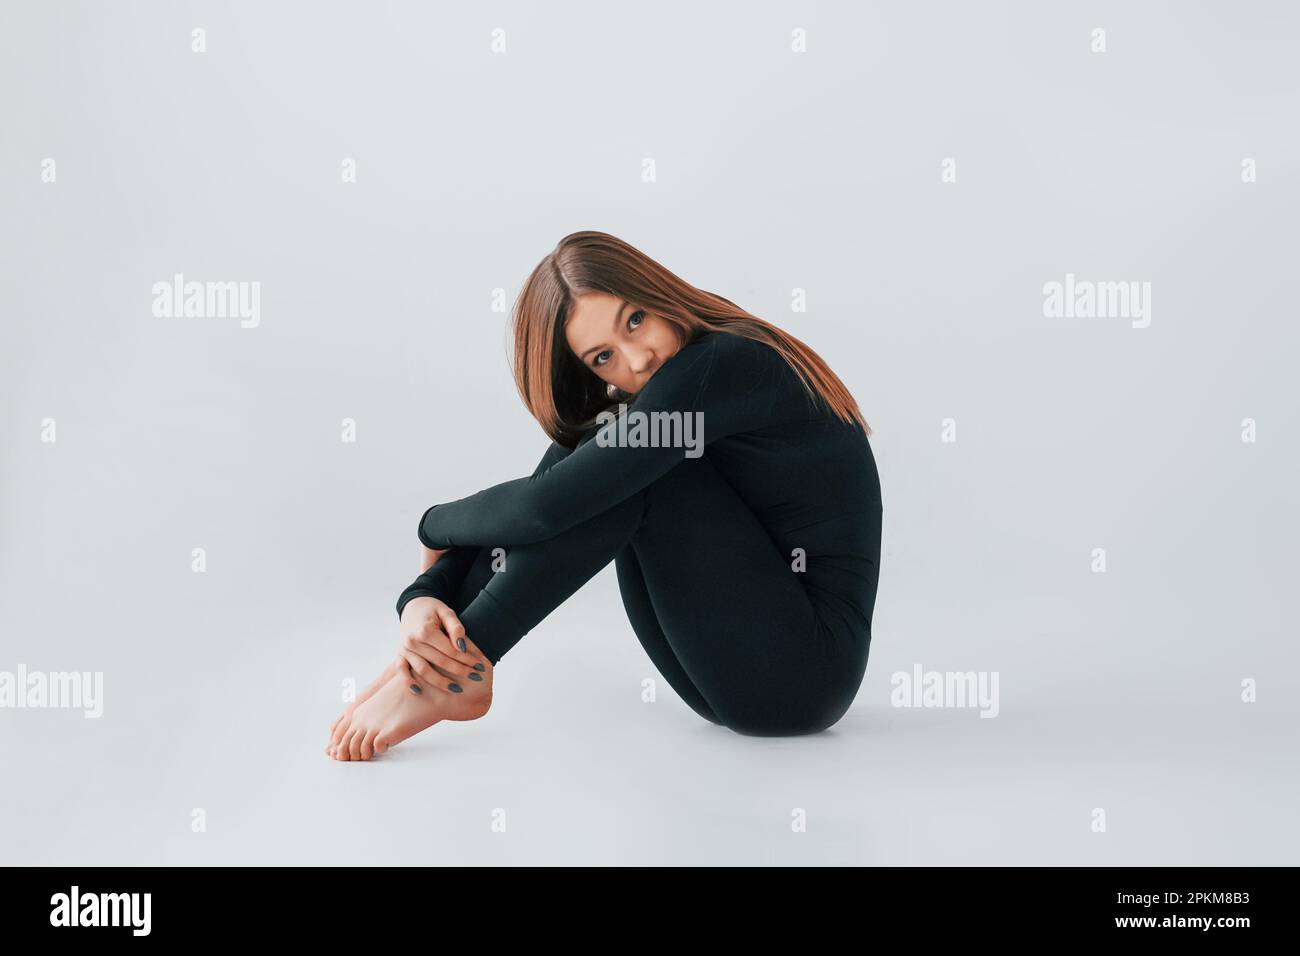 On the floor. Young woman in sportive clothes doing gymnastics indoors. Stock Photo